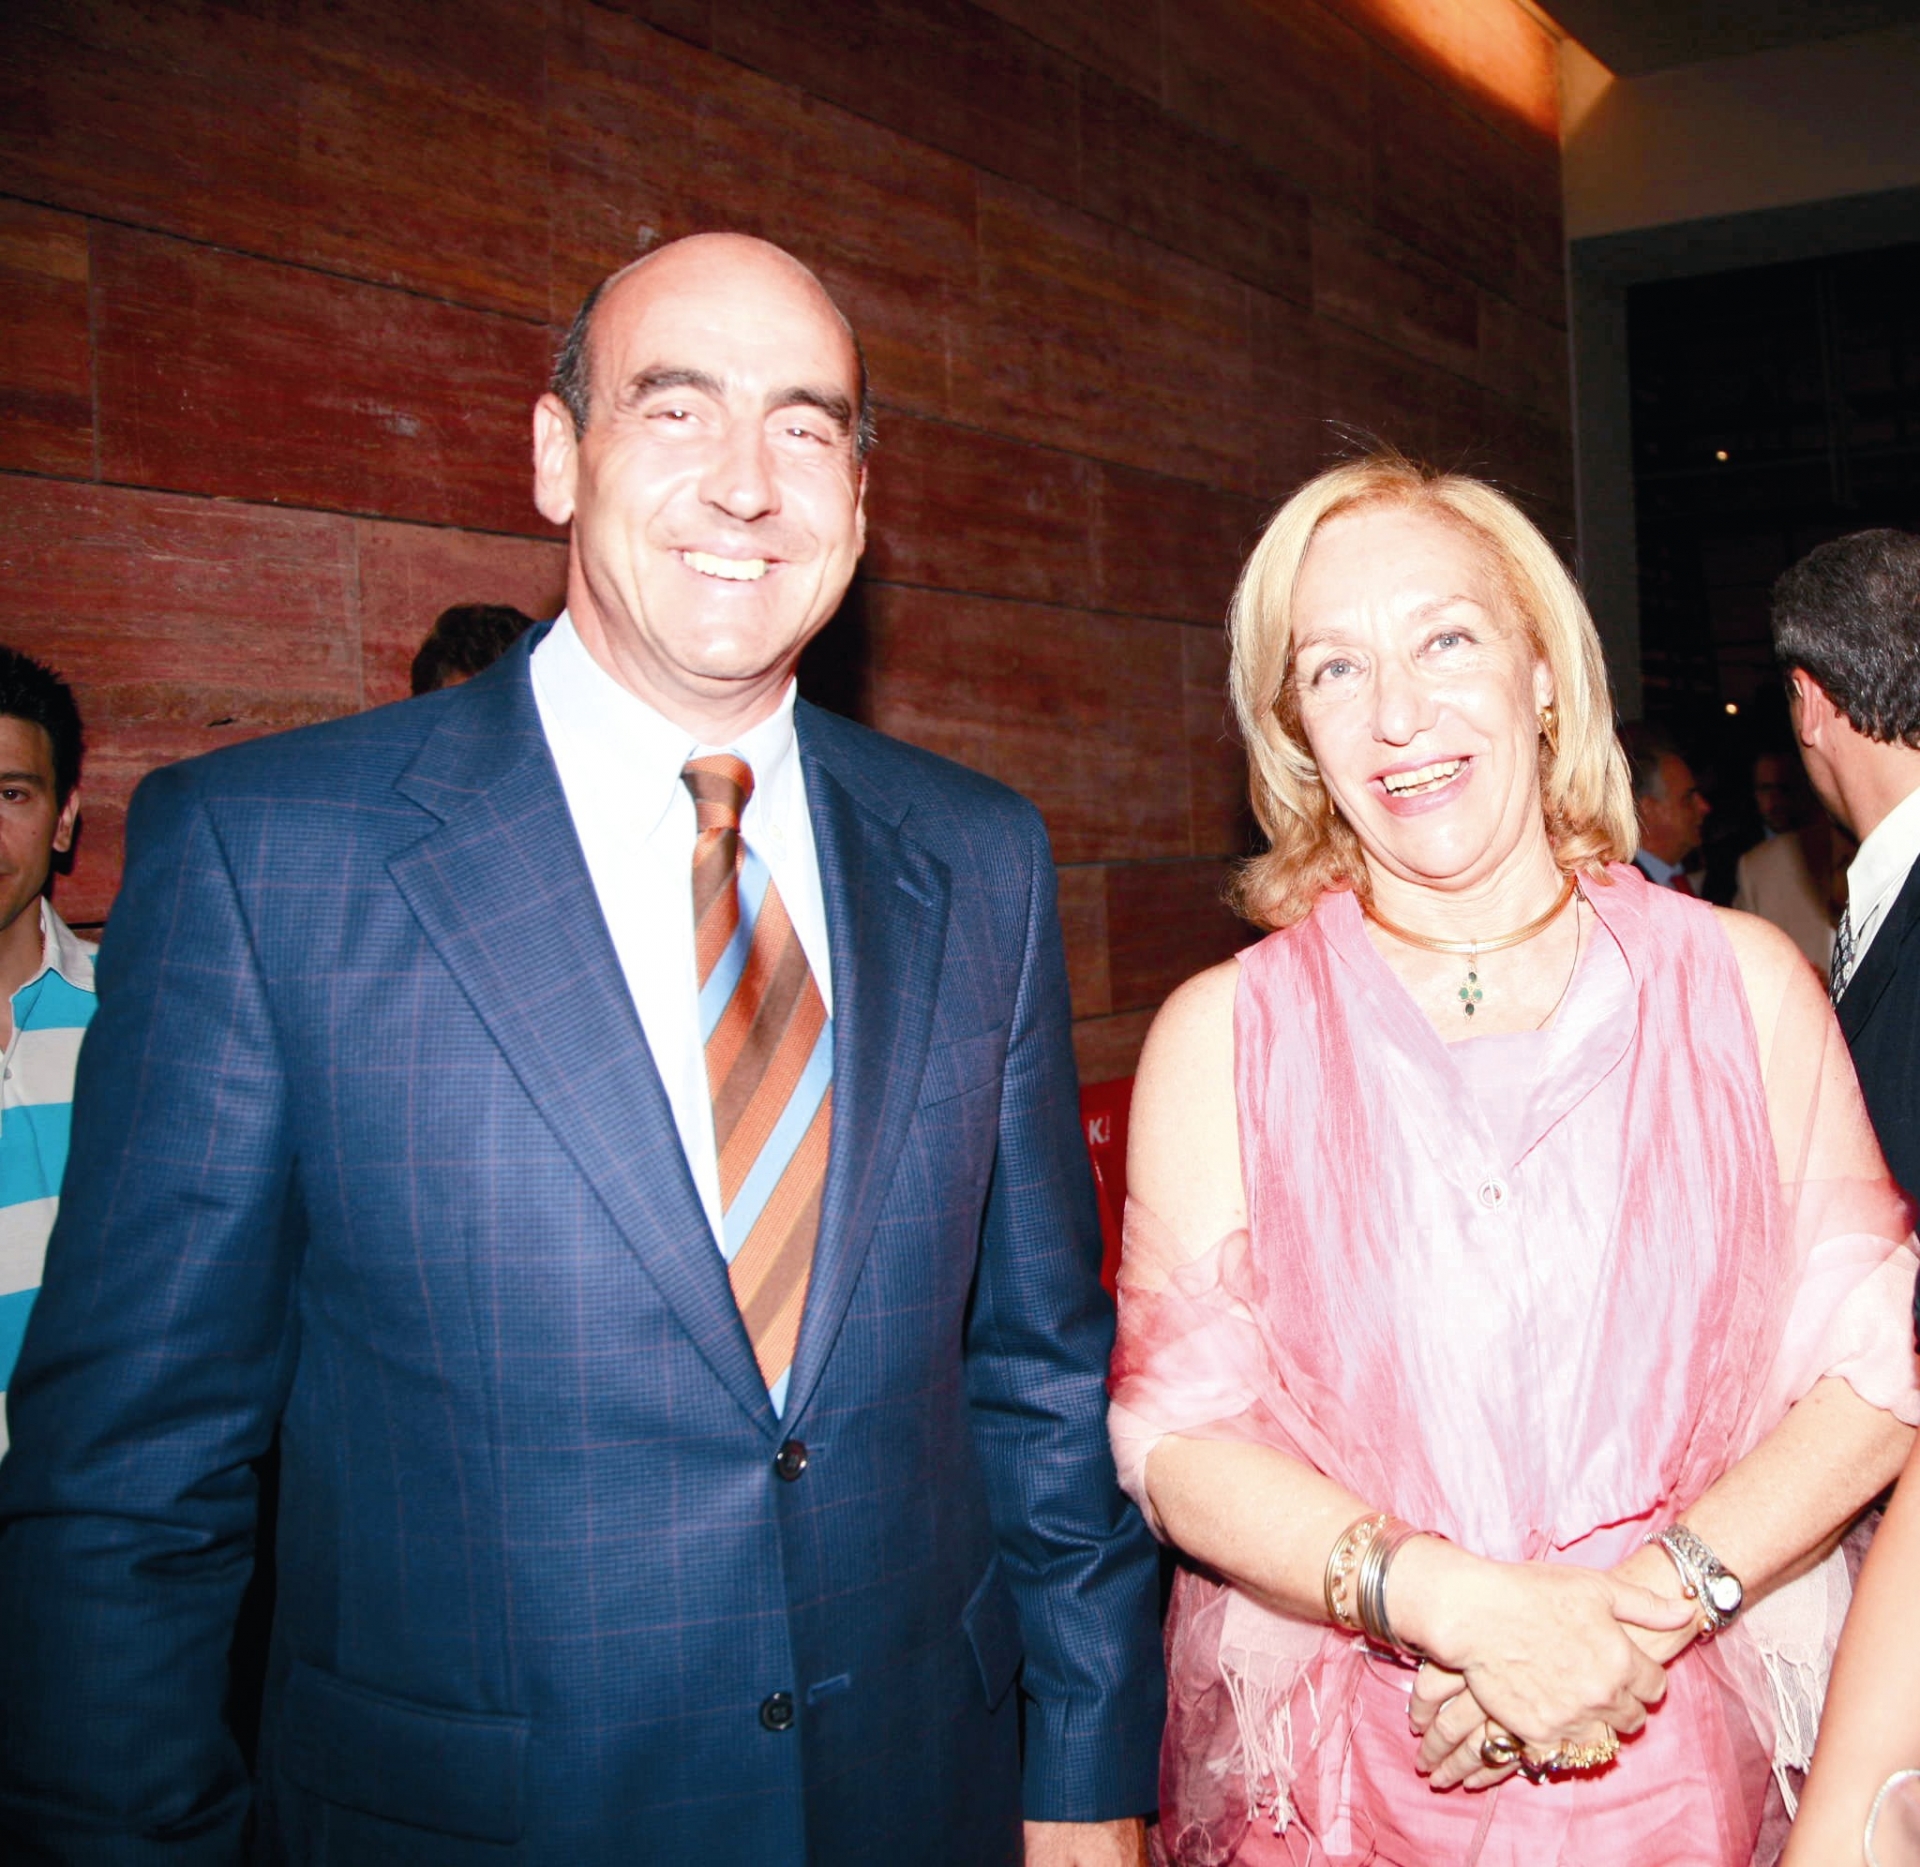 The Minister of Culture Giorgos Voulgarakis with Lila de Chaves